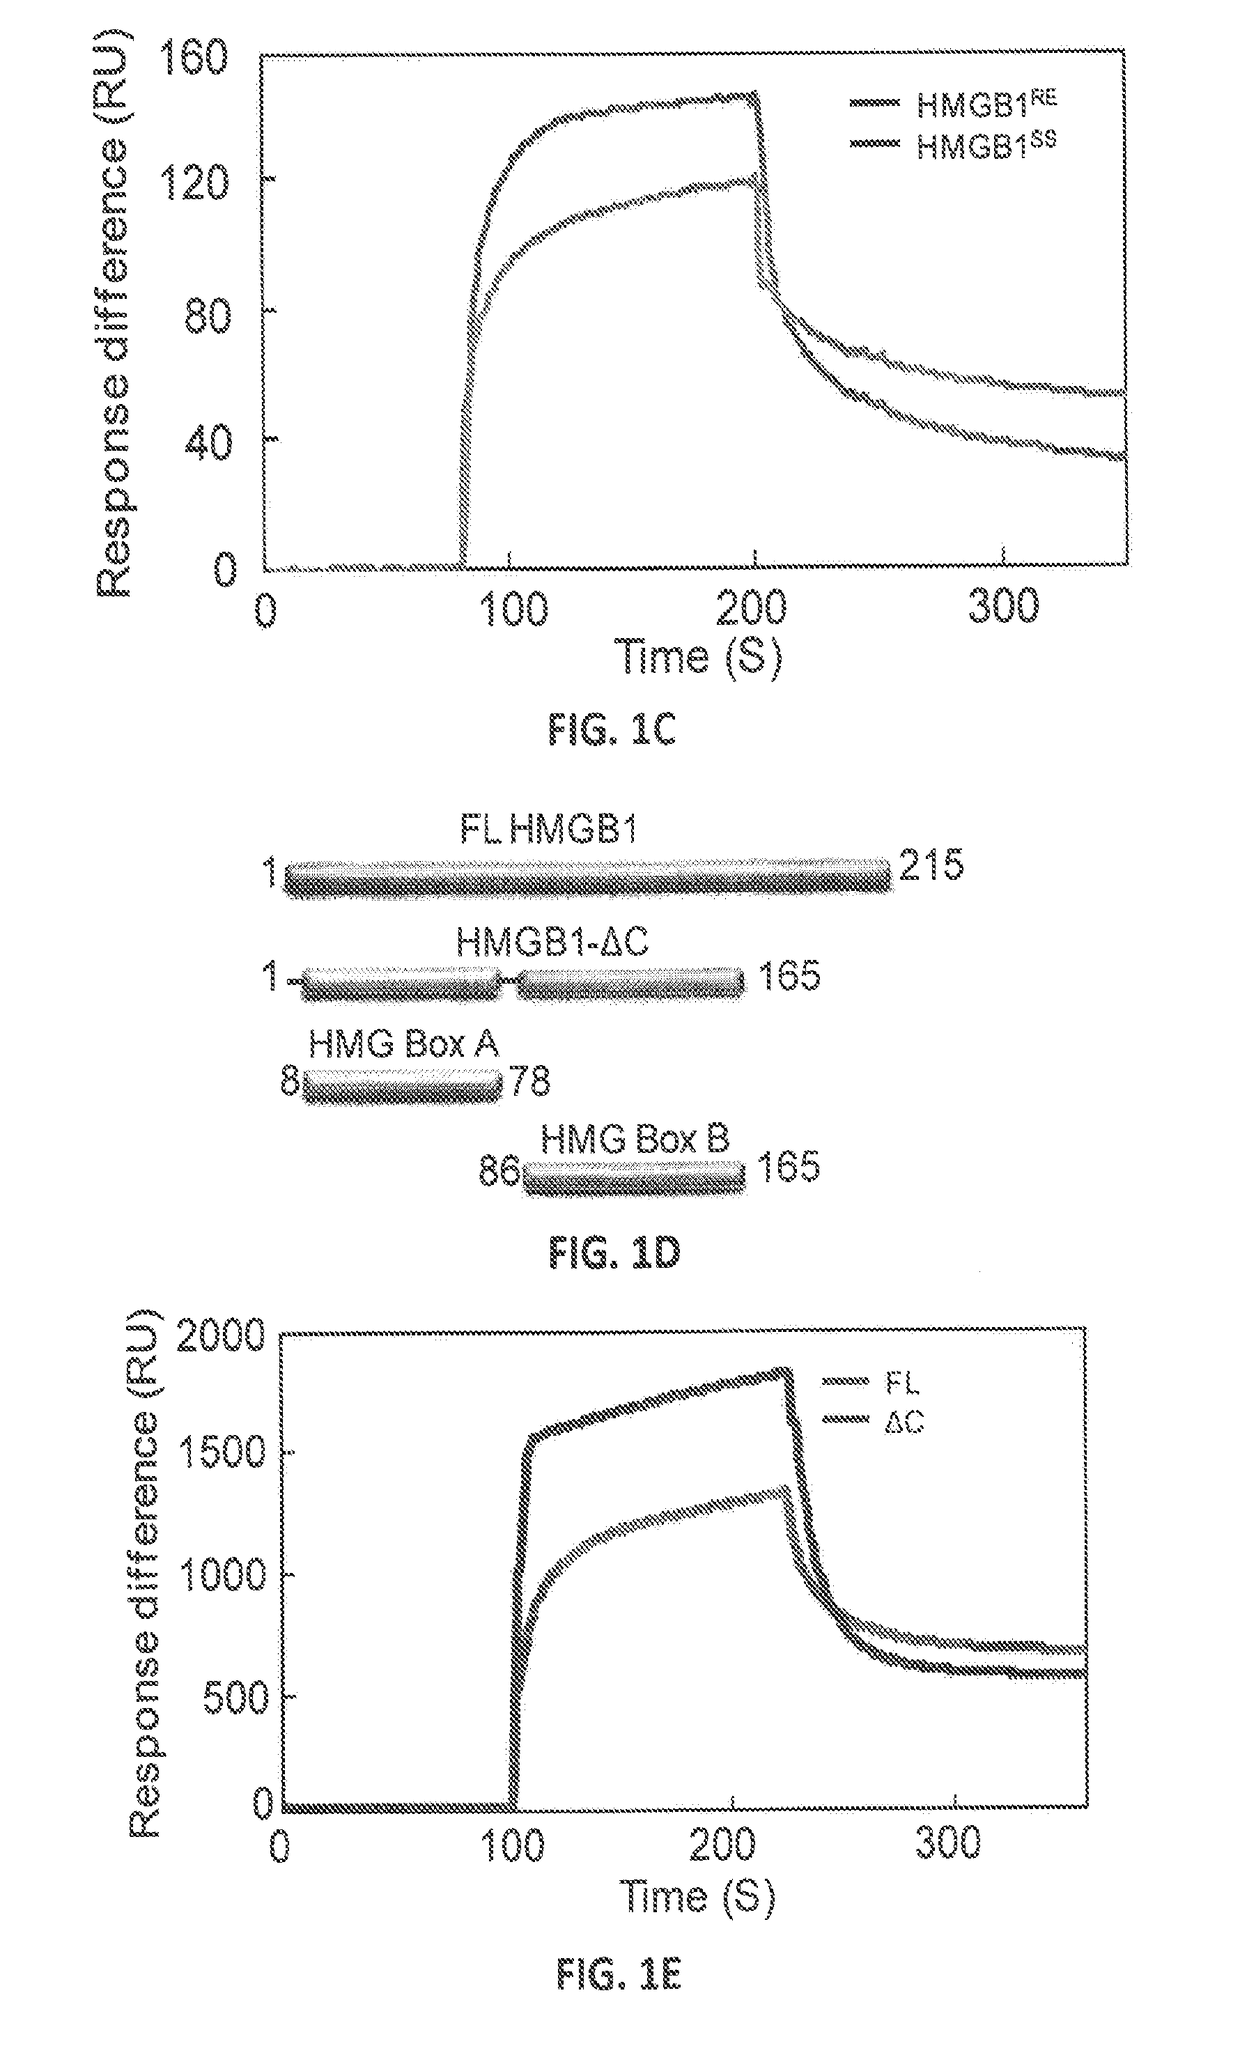 Structure and function of the salicyclic acid binding sites on human hmgb1 and methods of use thereof for the rational design of both salicyclic acid derivatives and other agents that alter animal and plant hmgbs activities